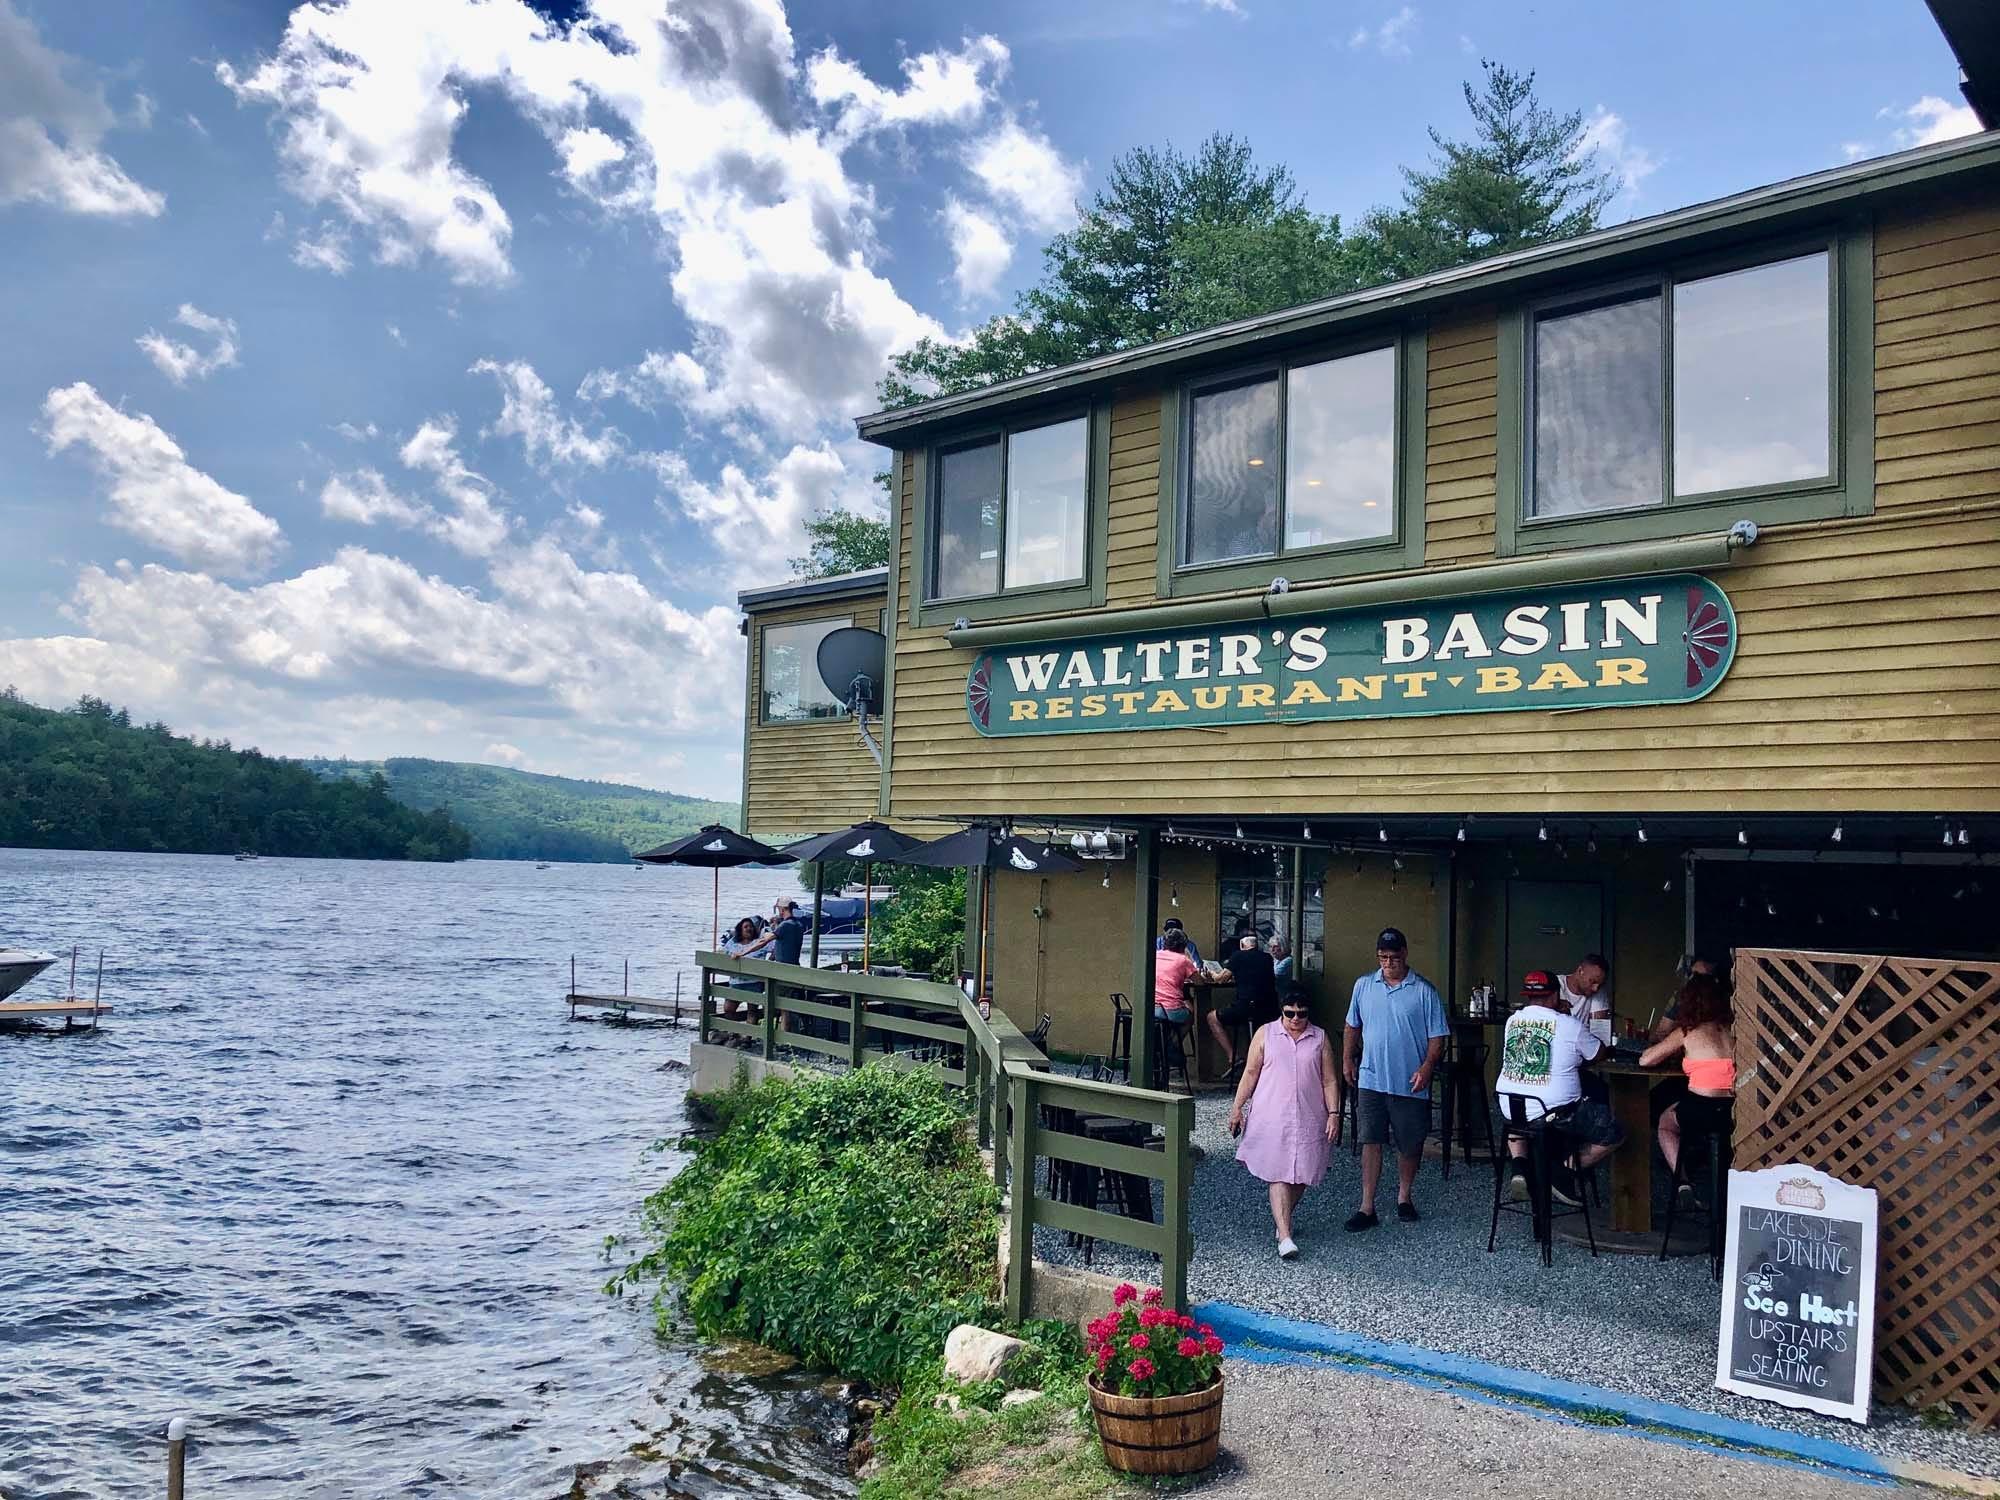 Lake tours start and return to the dock by Walter’s Basin restaurant and bar, a casual drop-in with waterside dining.